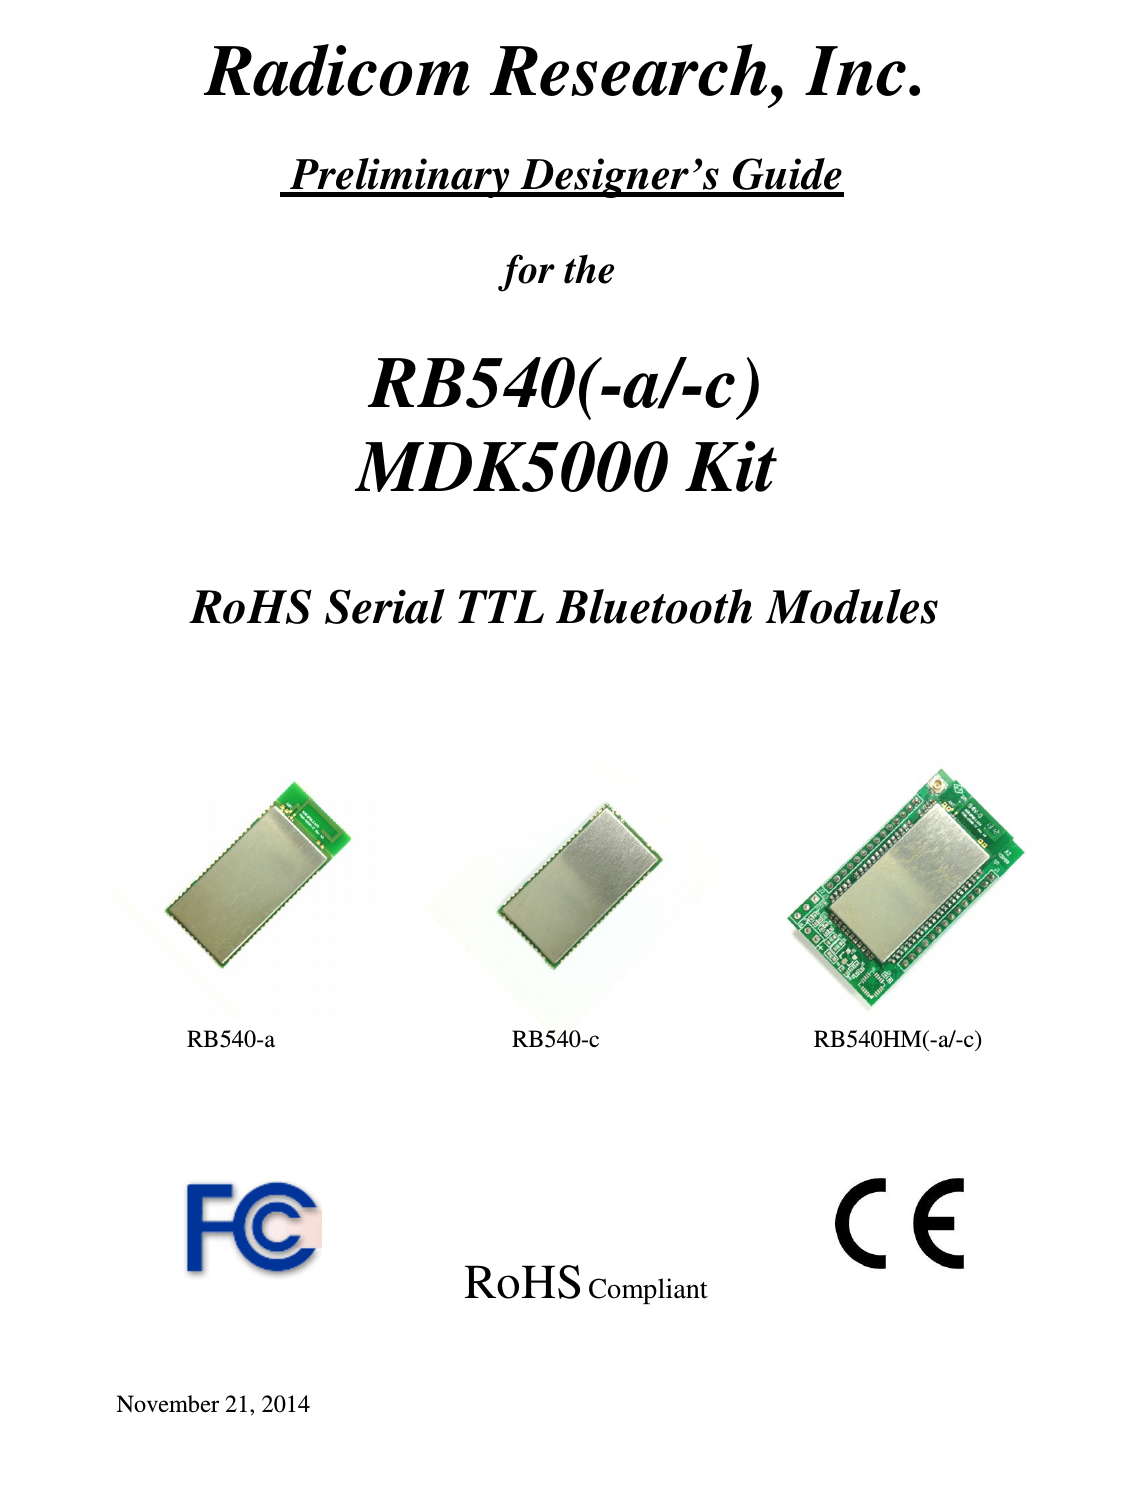 Radicom Research, Inc.    Preliminary Designer’s Guide                                    for the   RB540(-a/-c) MDK5000 Kit      RoHS Serial TTL Bluetooth Modules                                     RoHS Compliant       November 21, 2014       RB540-a                                       RB540-c              RB540HM(-a/-c) 